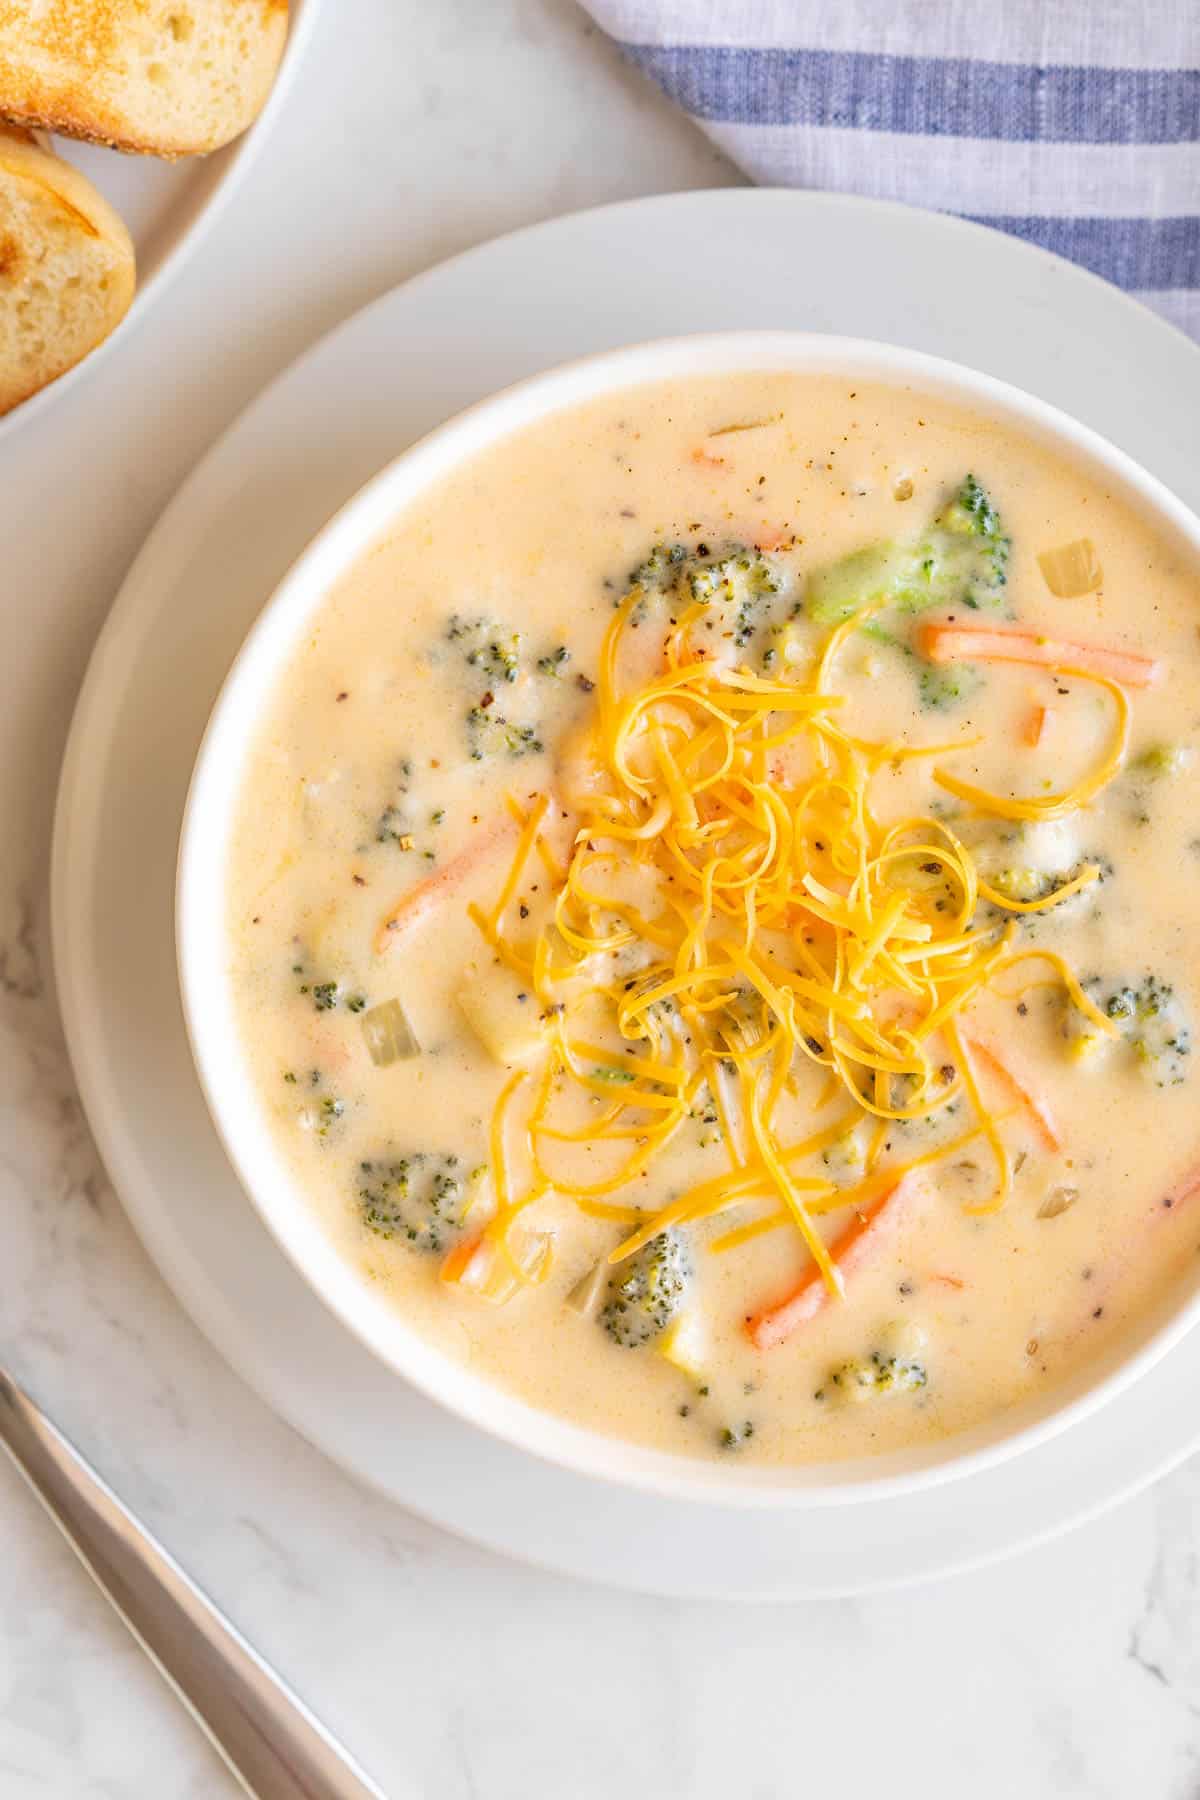 A bowl of broccoli cheddar soup sprinkled with shredded cheddar cheese.